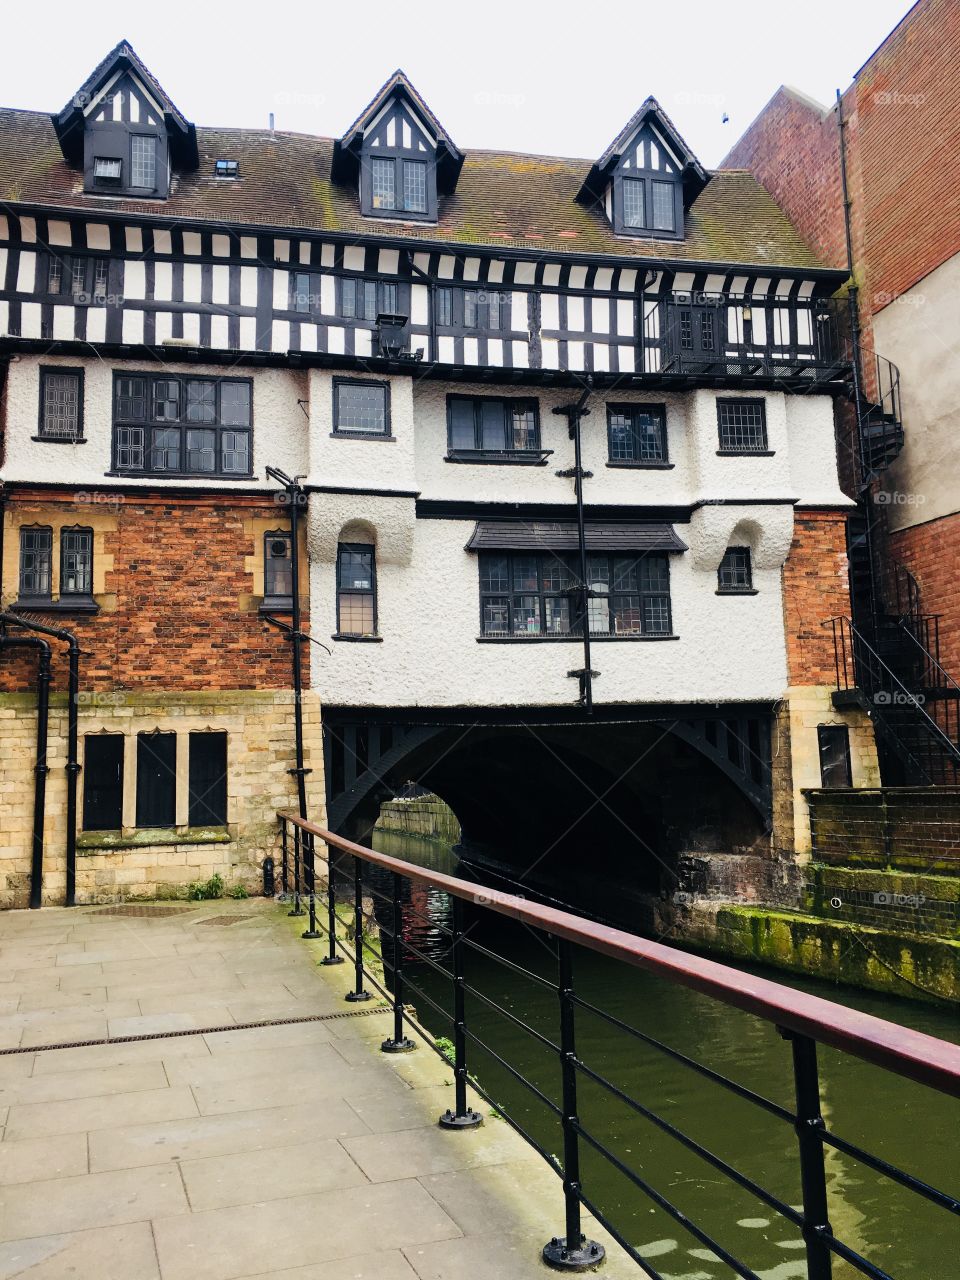 Stokes on High Bridge (oldest bridge with buildings in England) from The Glory Hole also featuring River Witham in Lincoln